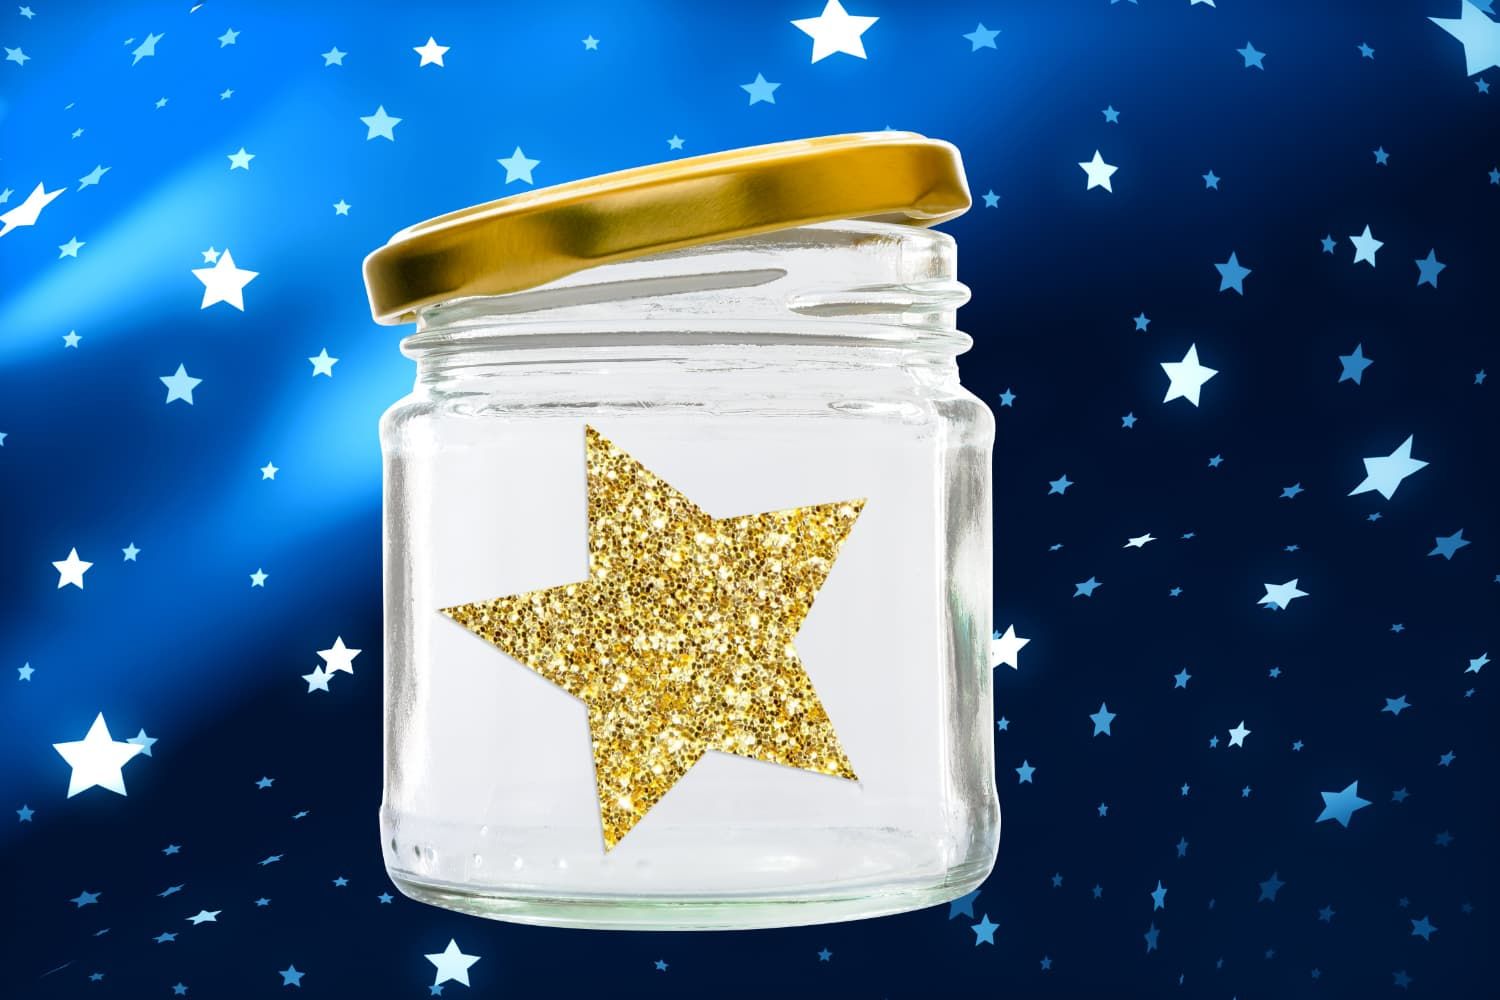 Object%20lesson%20-%20Stars%20in%20a%20jar-6132cbc5 Abram counts all the stars